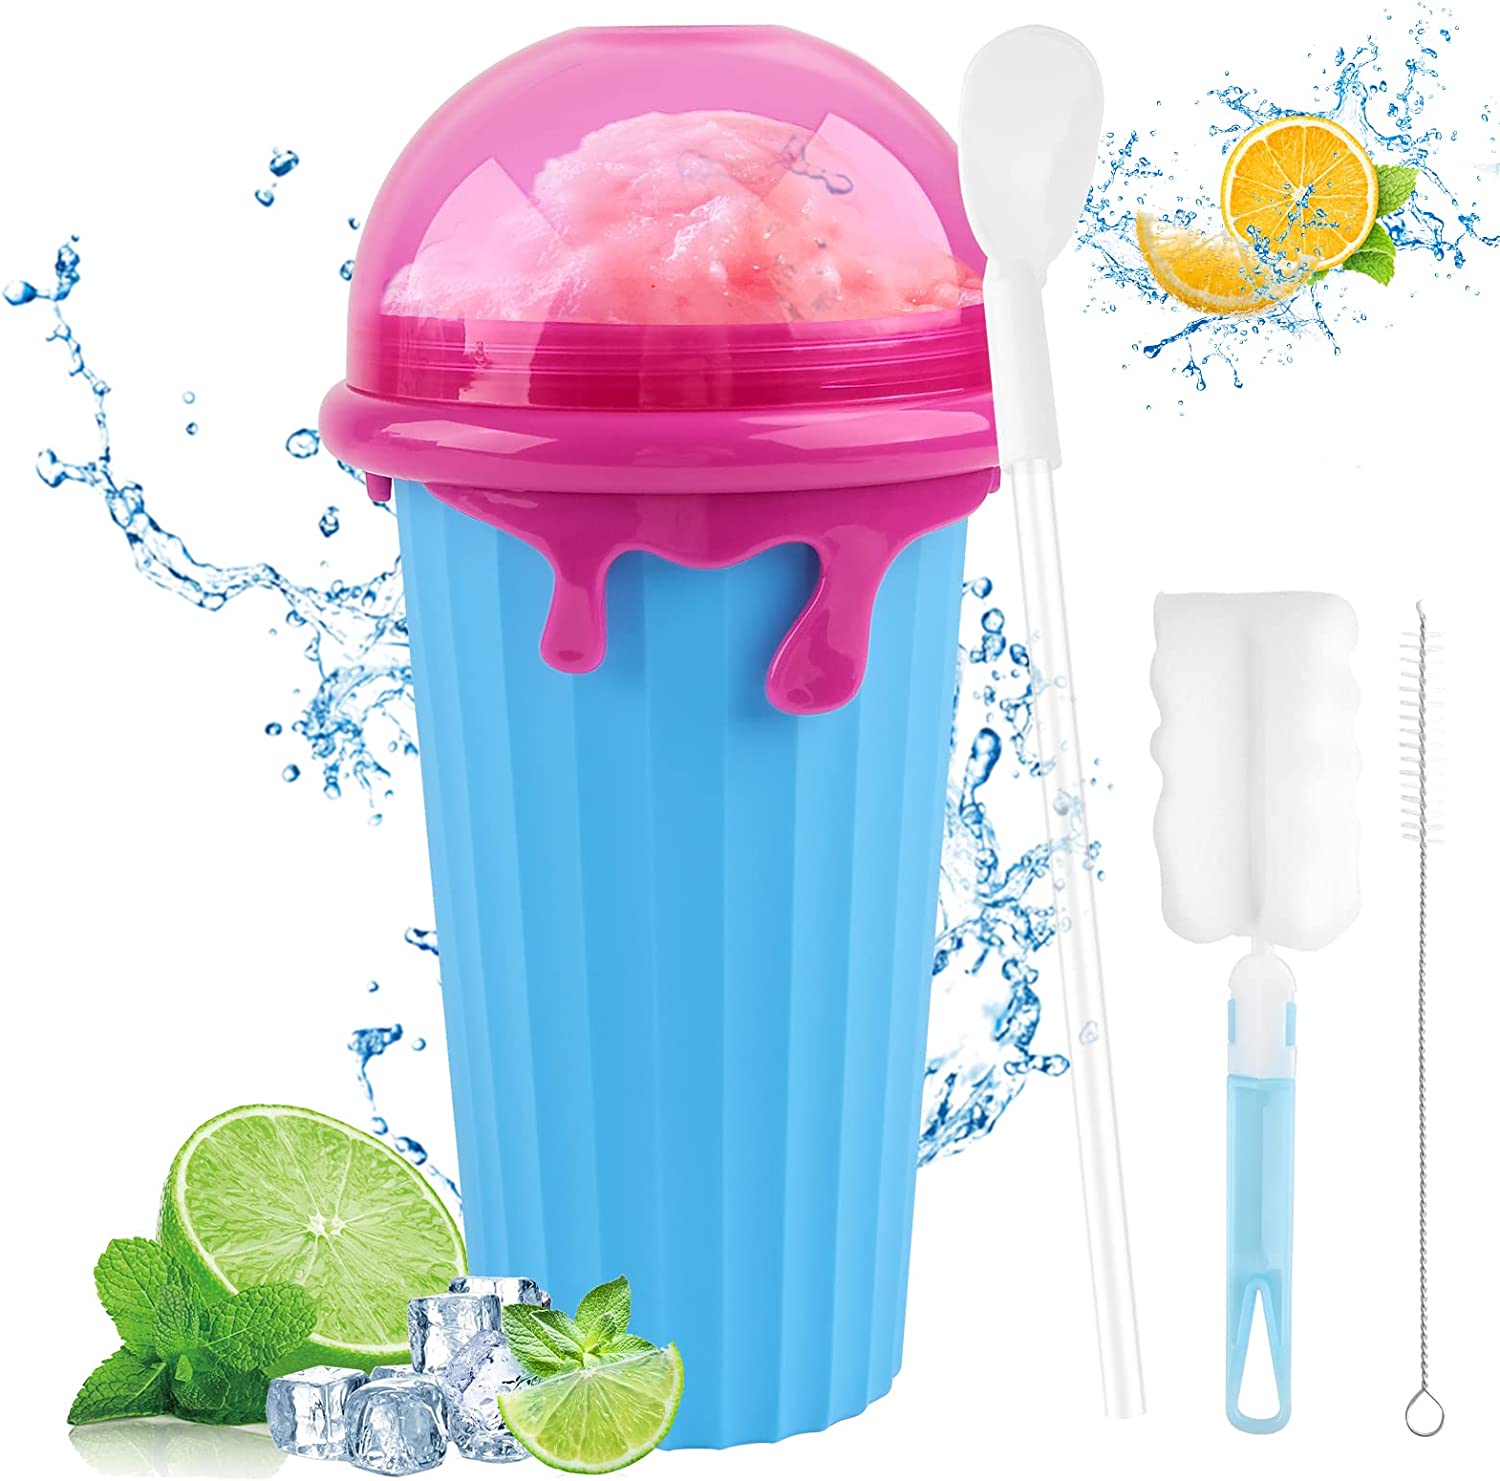 WUGU Slushy Cup, 500 ml Silicone Slushy Maker Cup with 2 in 1 Straw and Spoon, Slushy Ice Cream Cup with Cleaning Brush, Slushy Maker Cup for Various Drinks Smoothies (Blue)